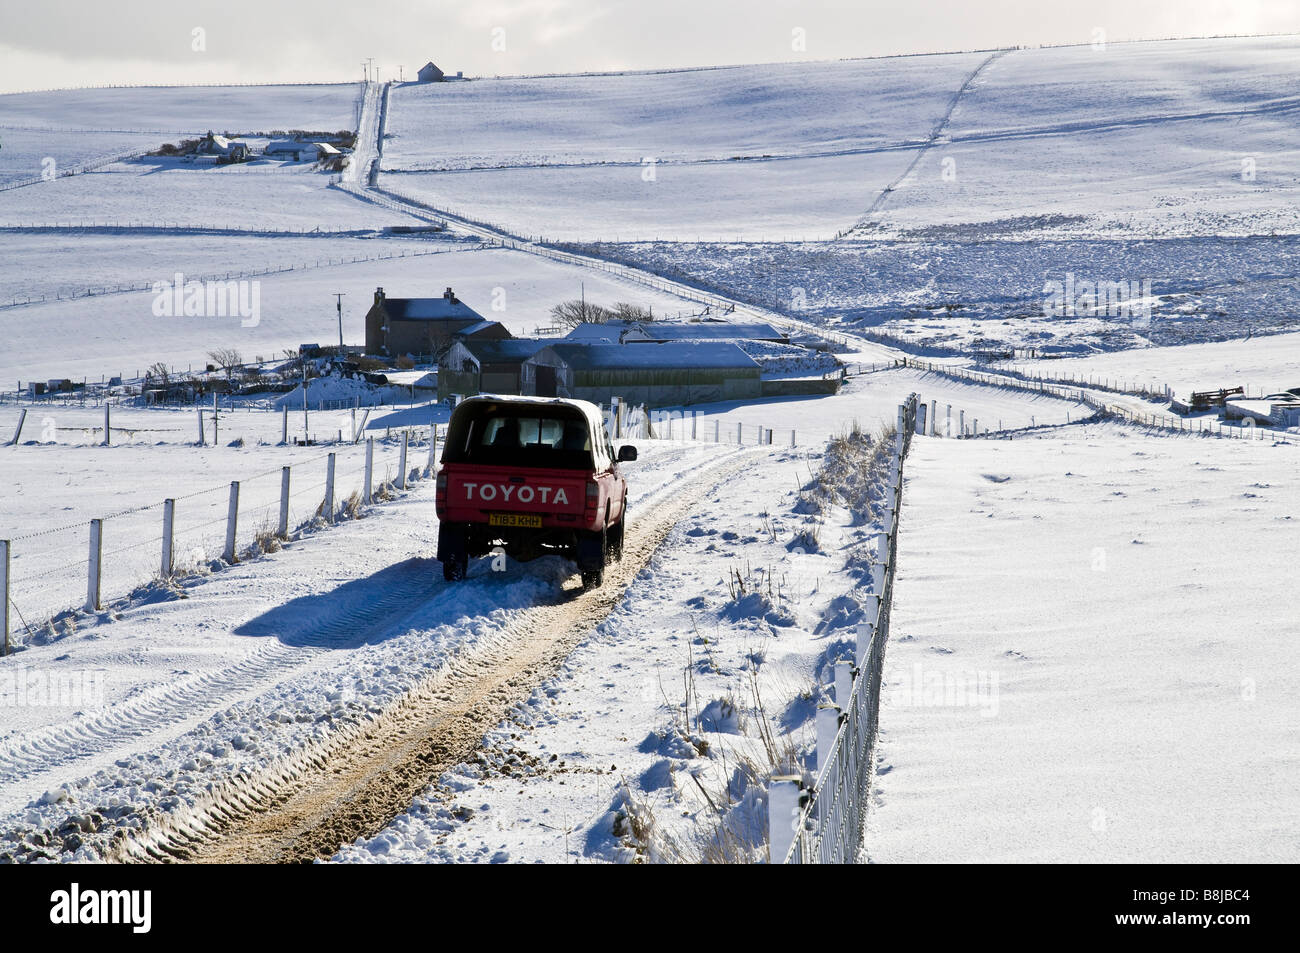 dh Scotland Winter Road ROADS UK Car driving icy snowy roads snow Orkney road car rural country farm farming Stock Photo